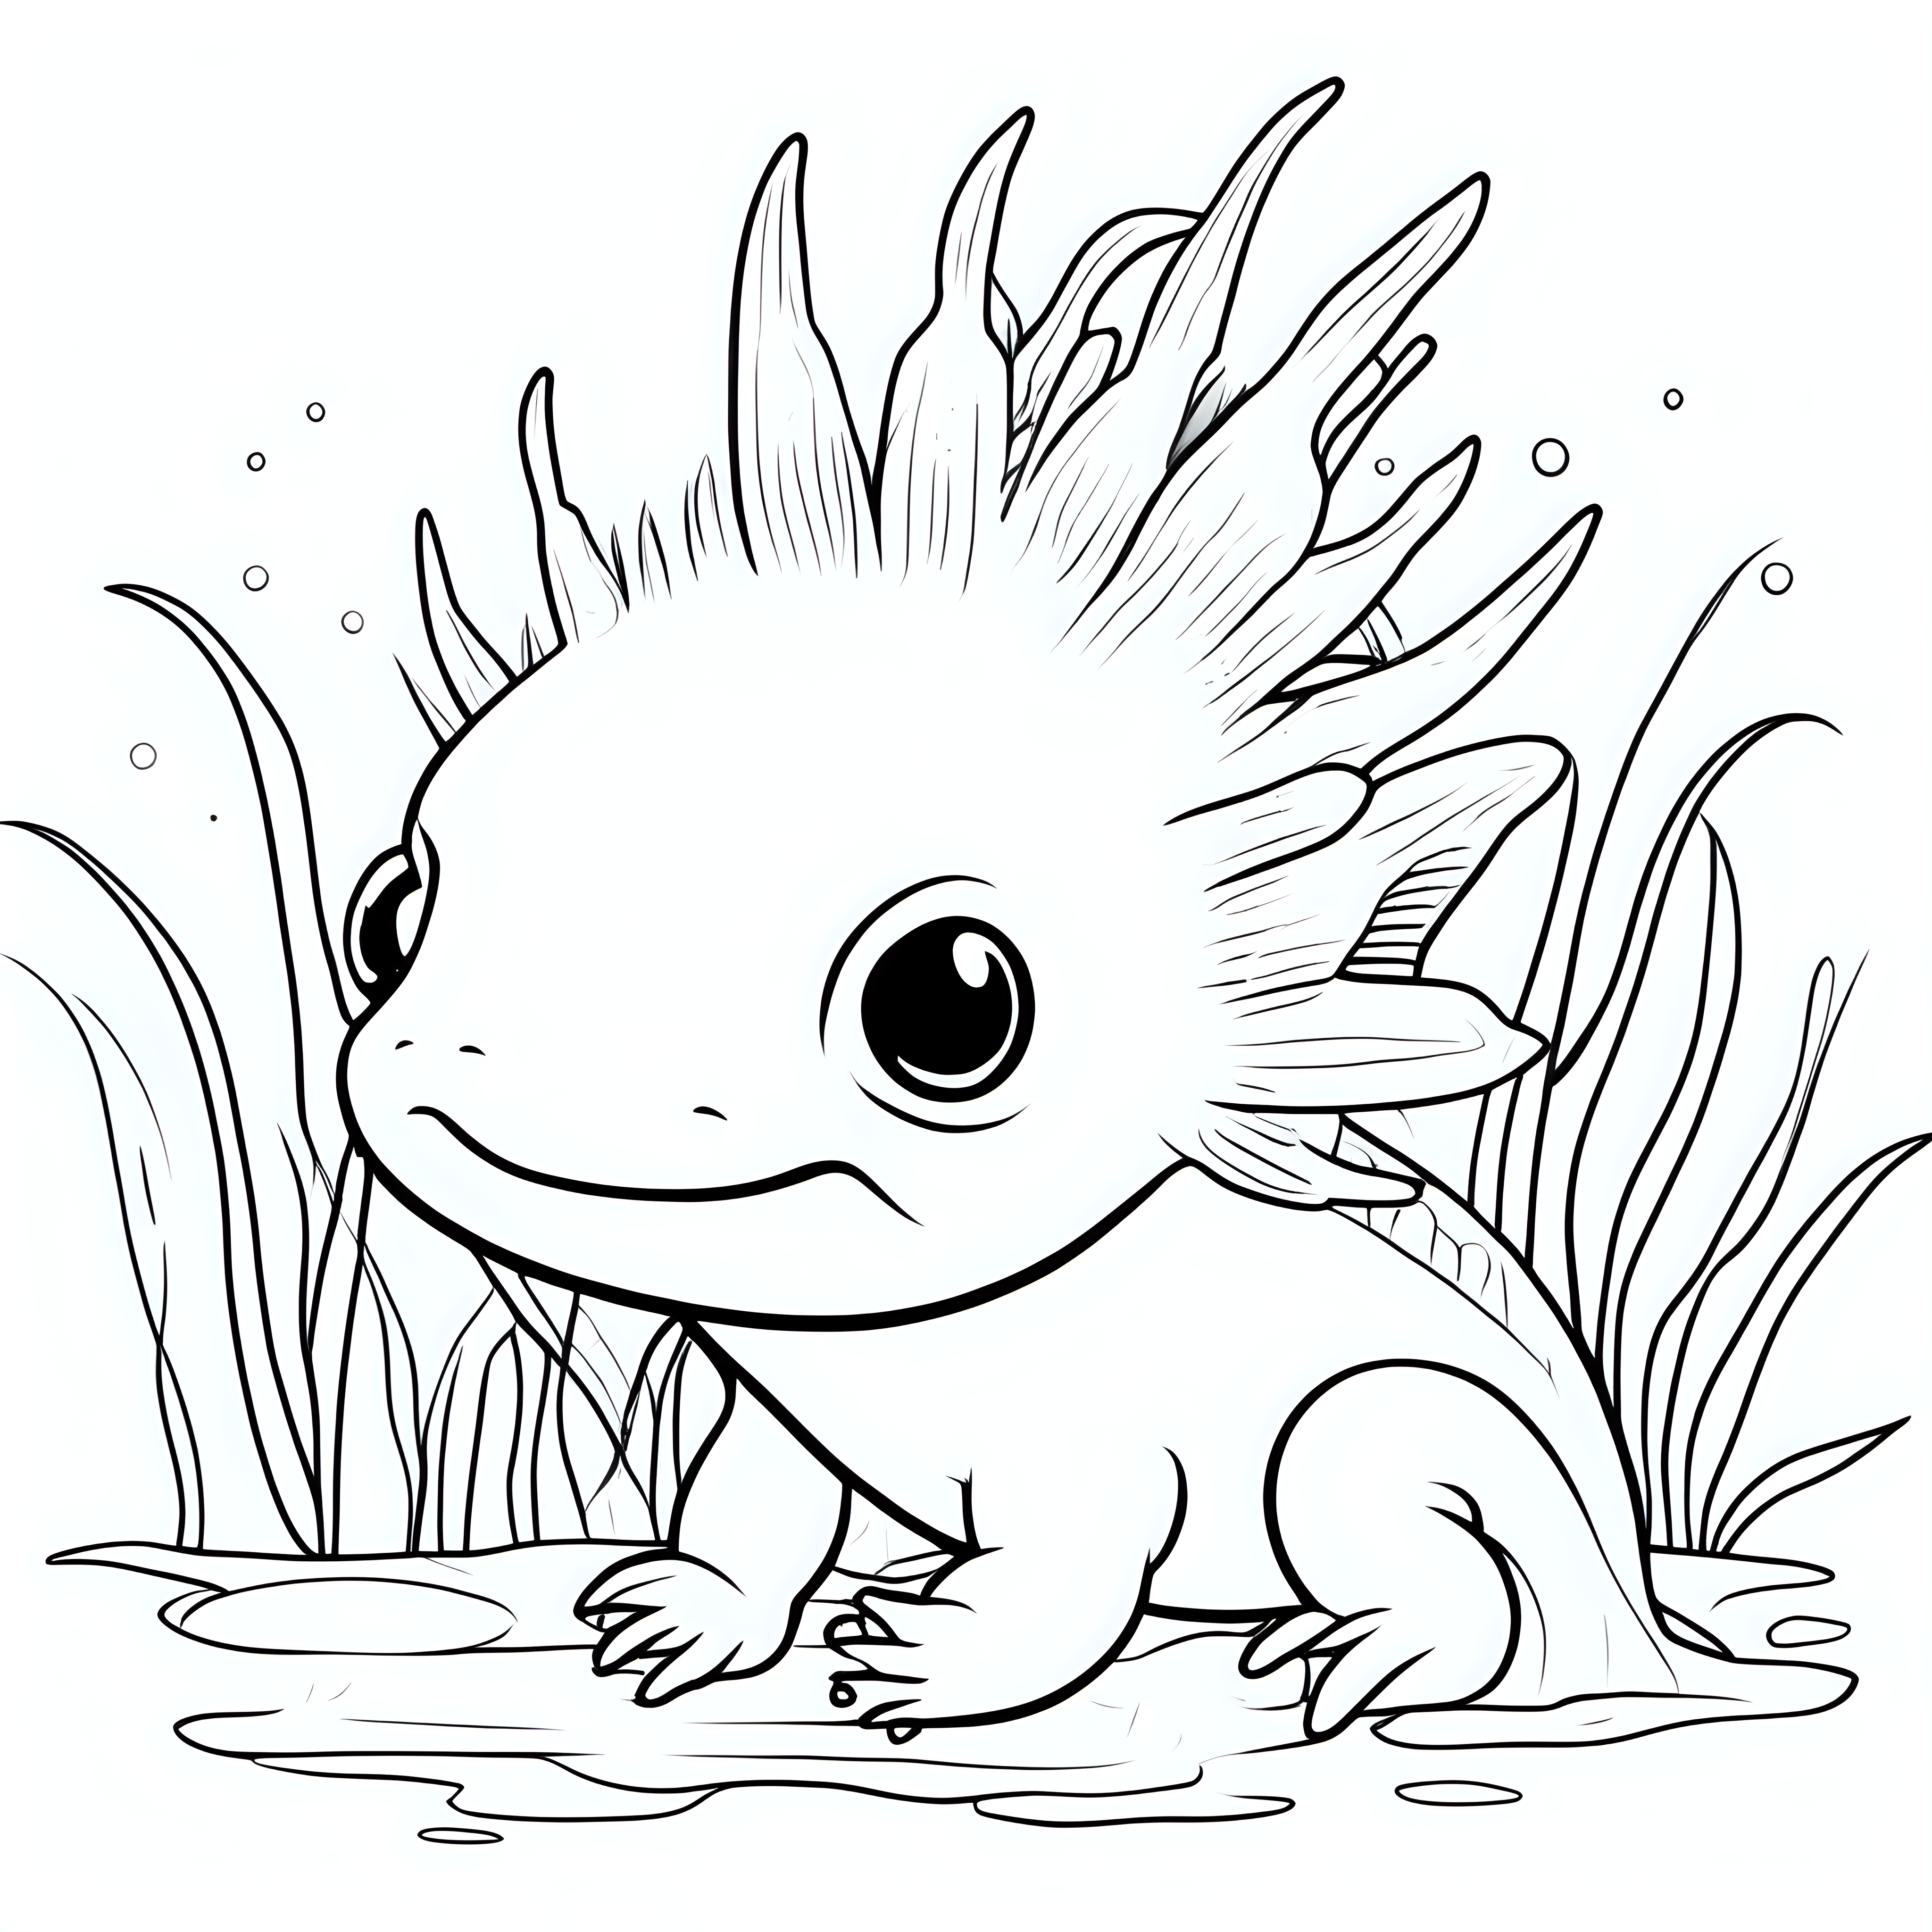 draw a cute Axolotl with only the outline